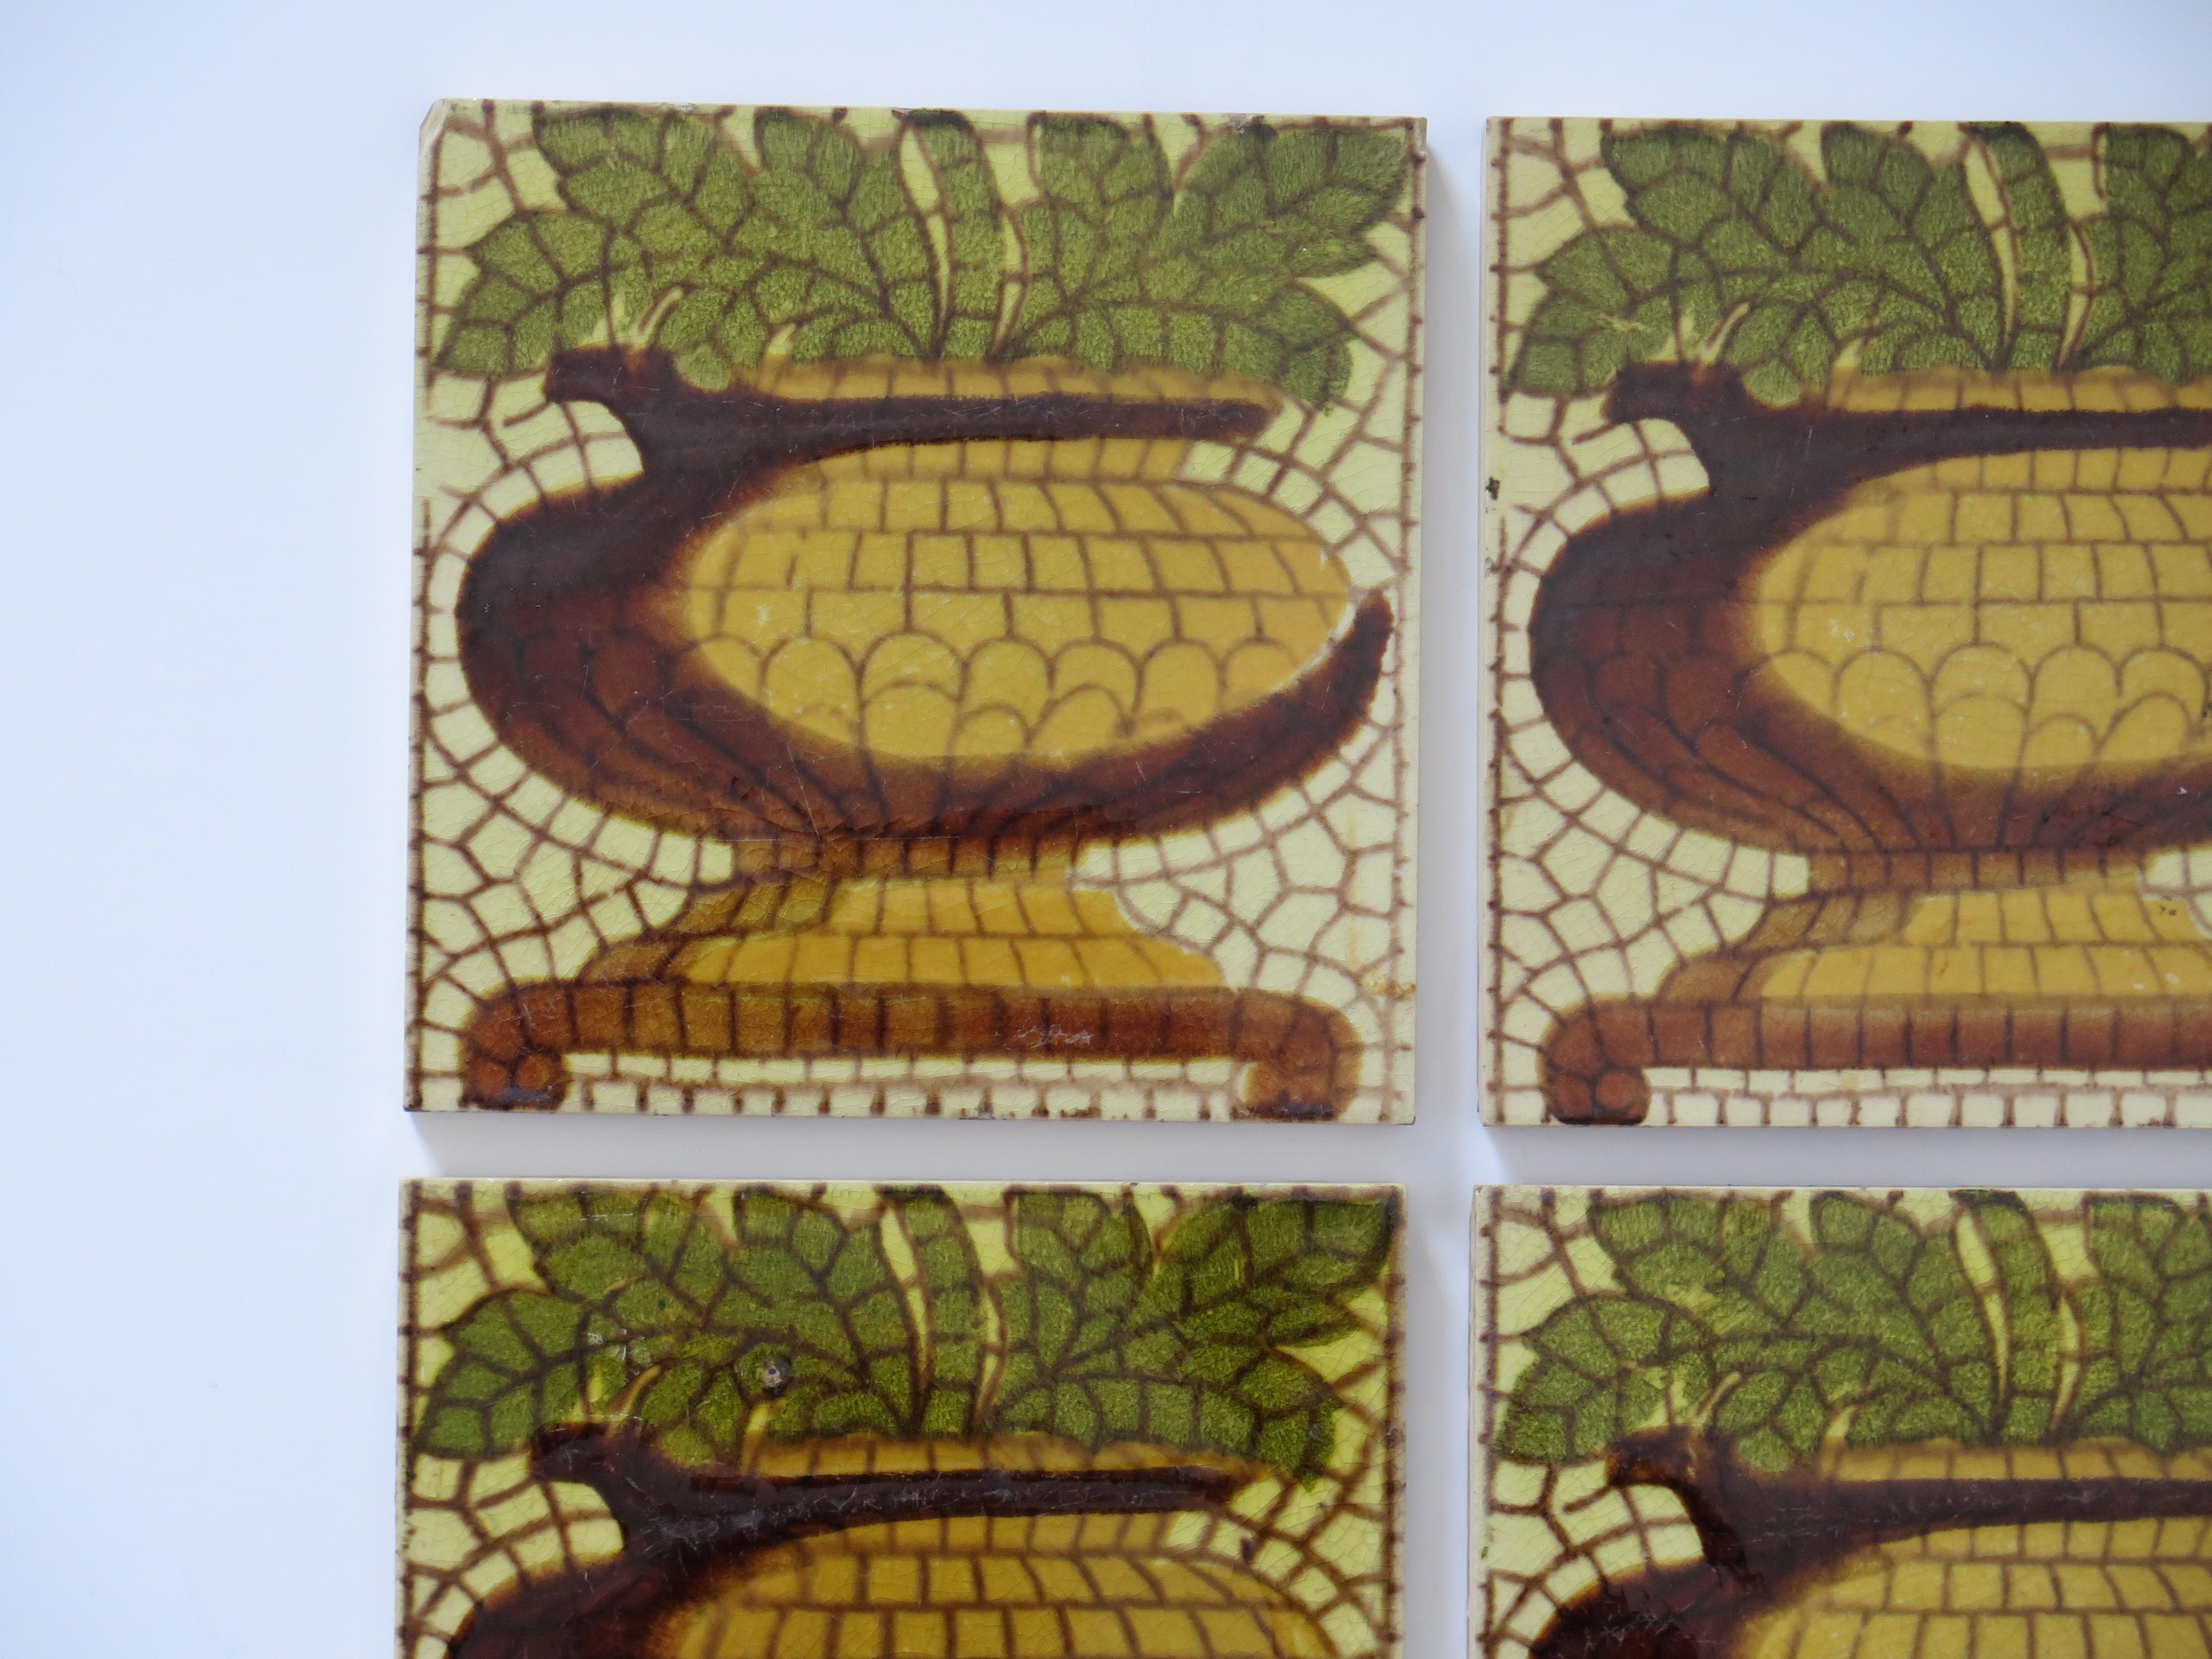 British Set of SIX Ceramic Wall Tiles pineapple vase pat'n 6 inches Square,  circa 1960 For Sale